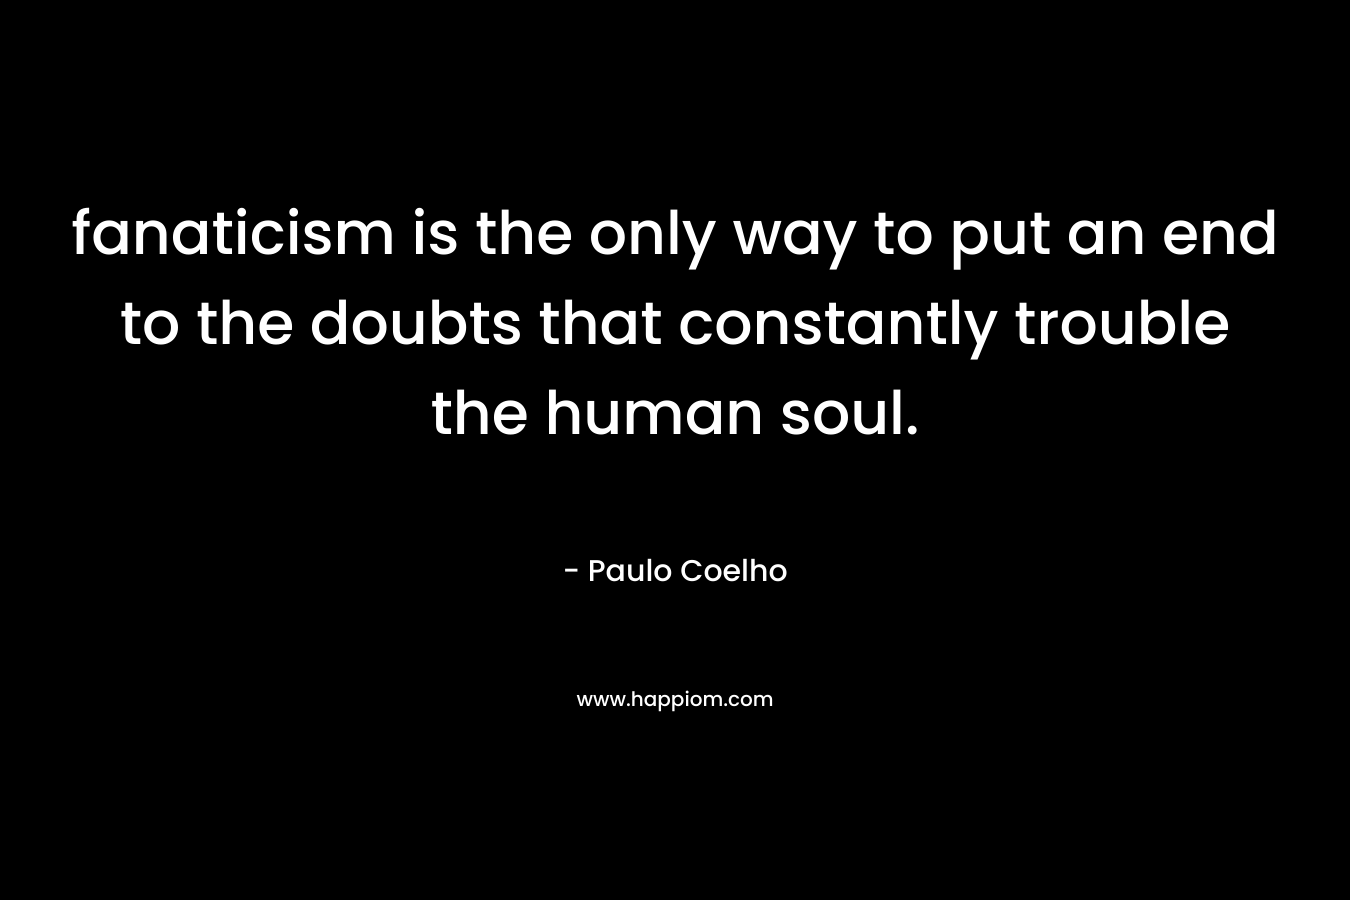 fanaticism is the only way to put an end to the doubts that constantly trouble the human soul. – Paulo Coelho